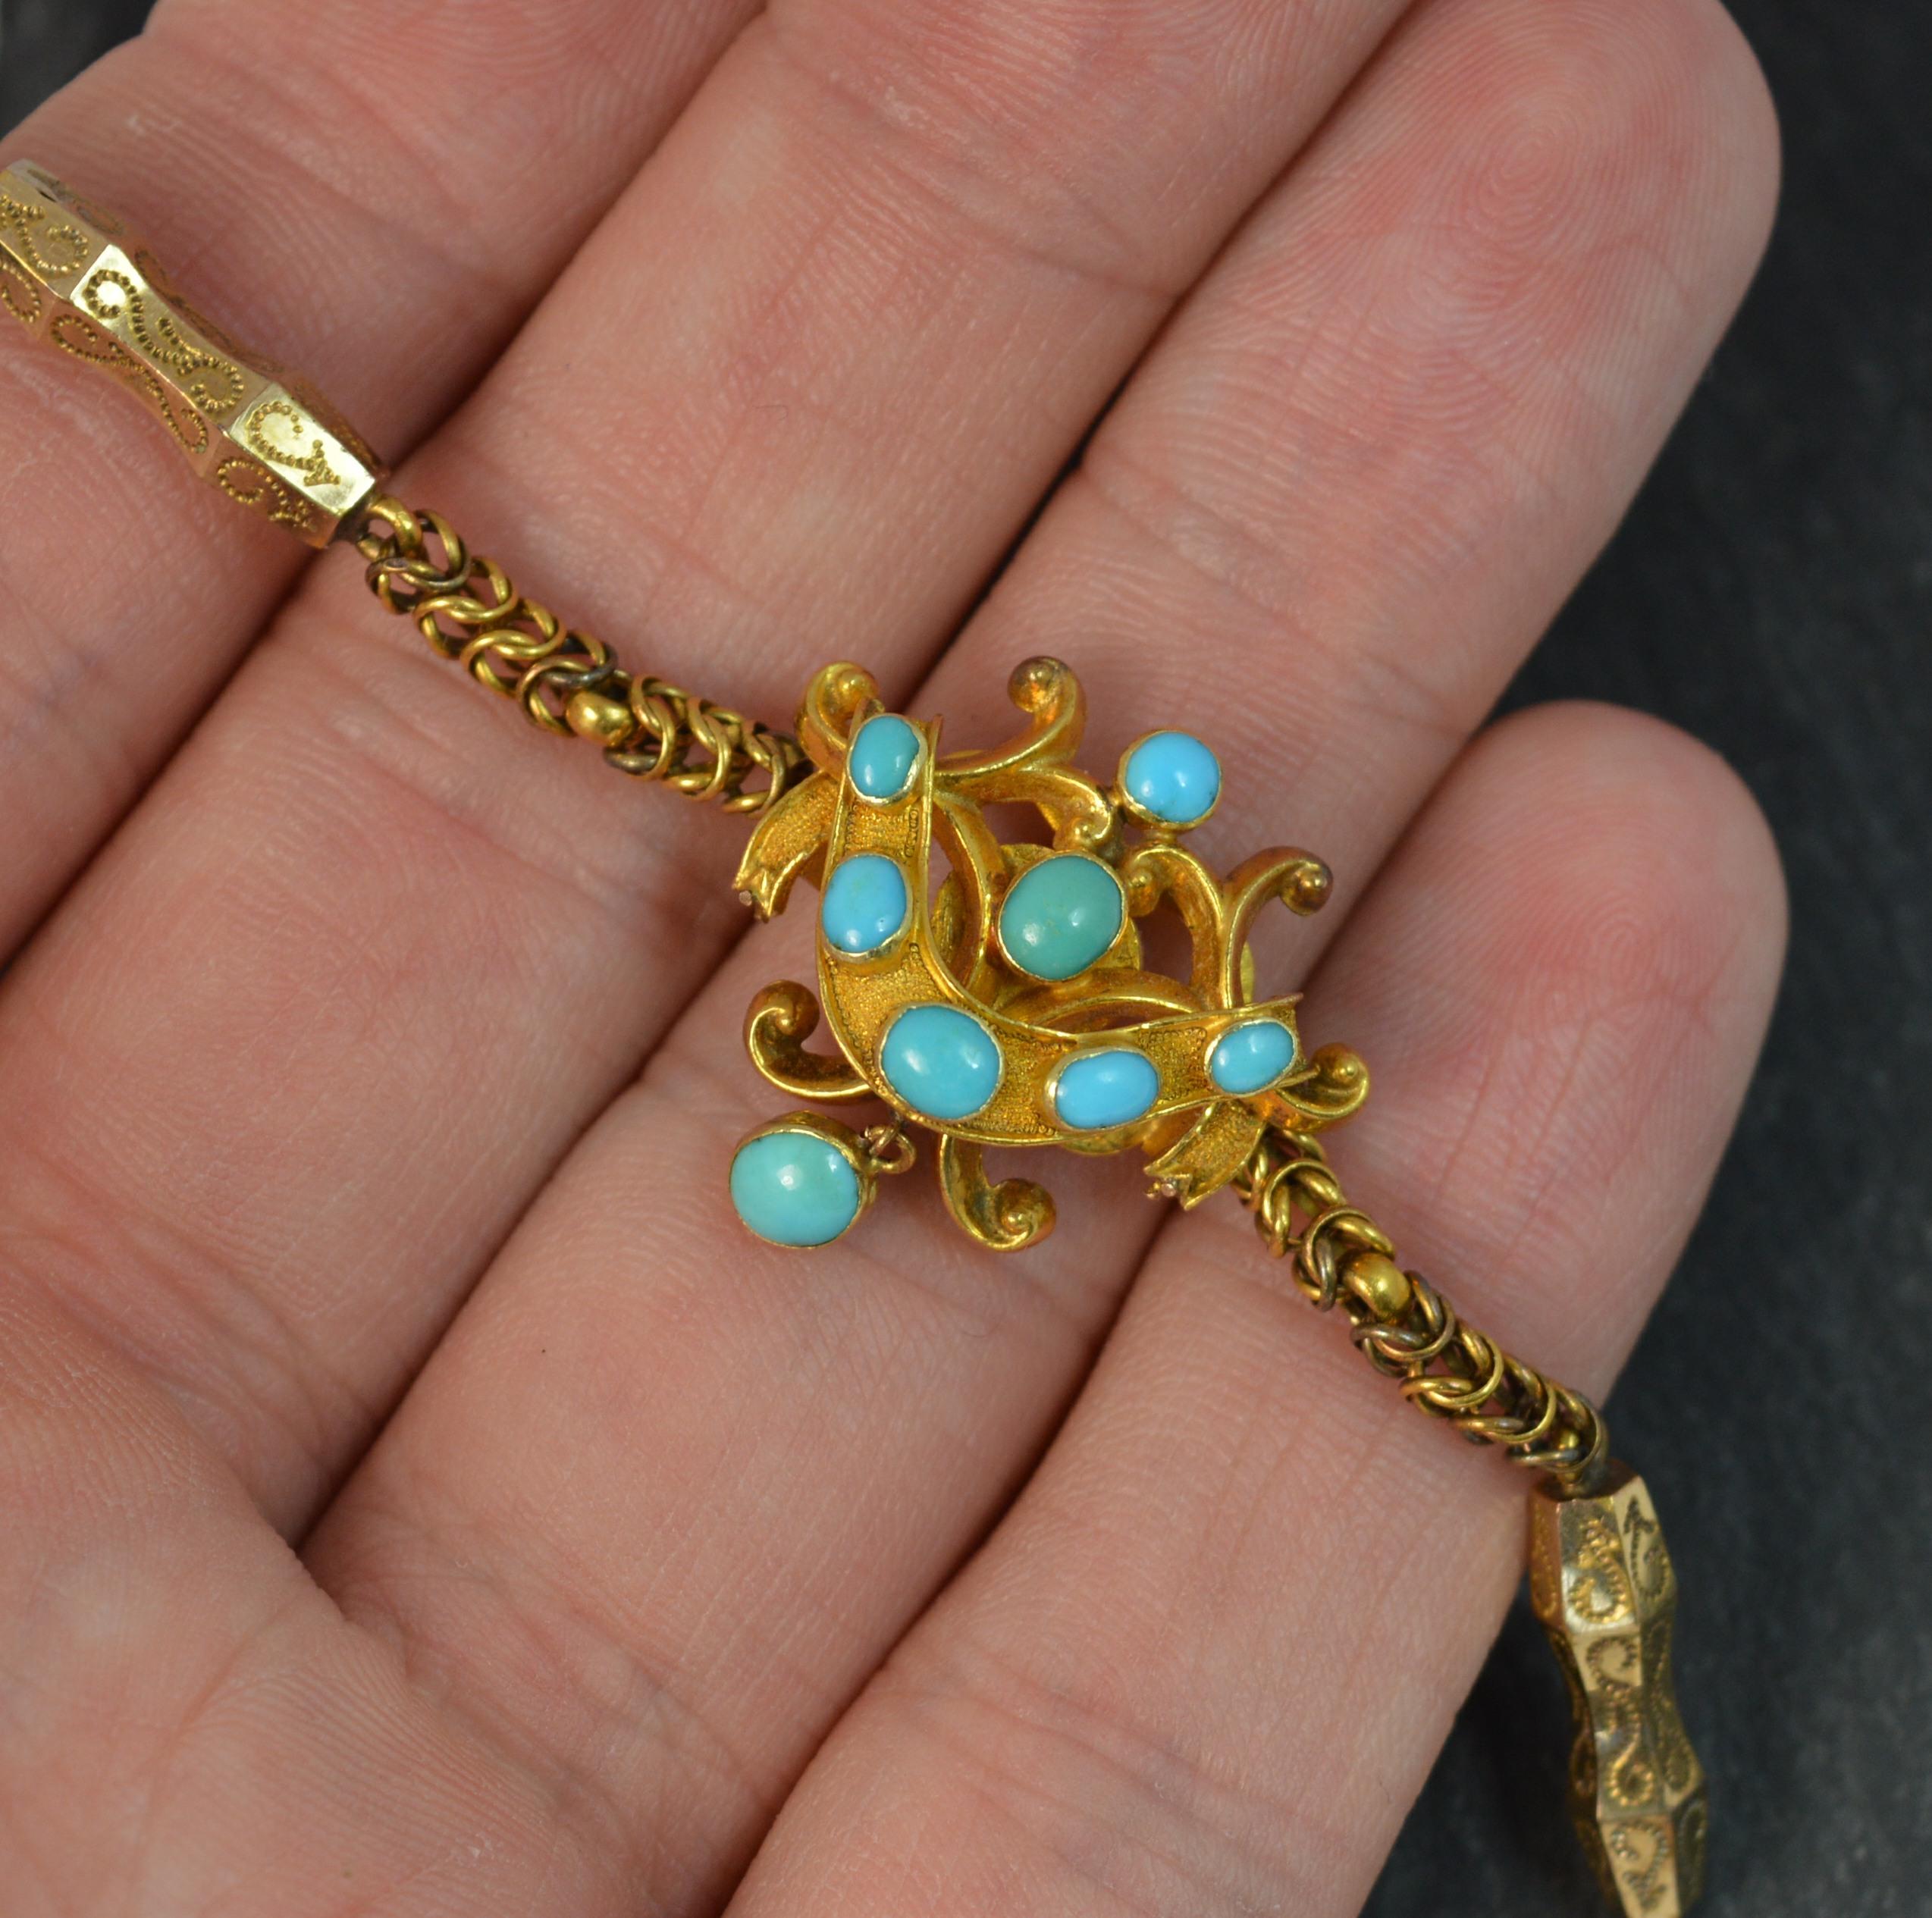 A superb mid Victorian period example. c1860

Designed with a cluster panel set with turquoise to the front and locket section to reverse.

Fancy link example with snake like links and engraved sections in between.

Solid 15 carat yellow gold